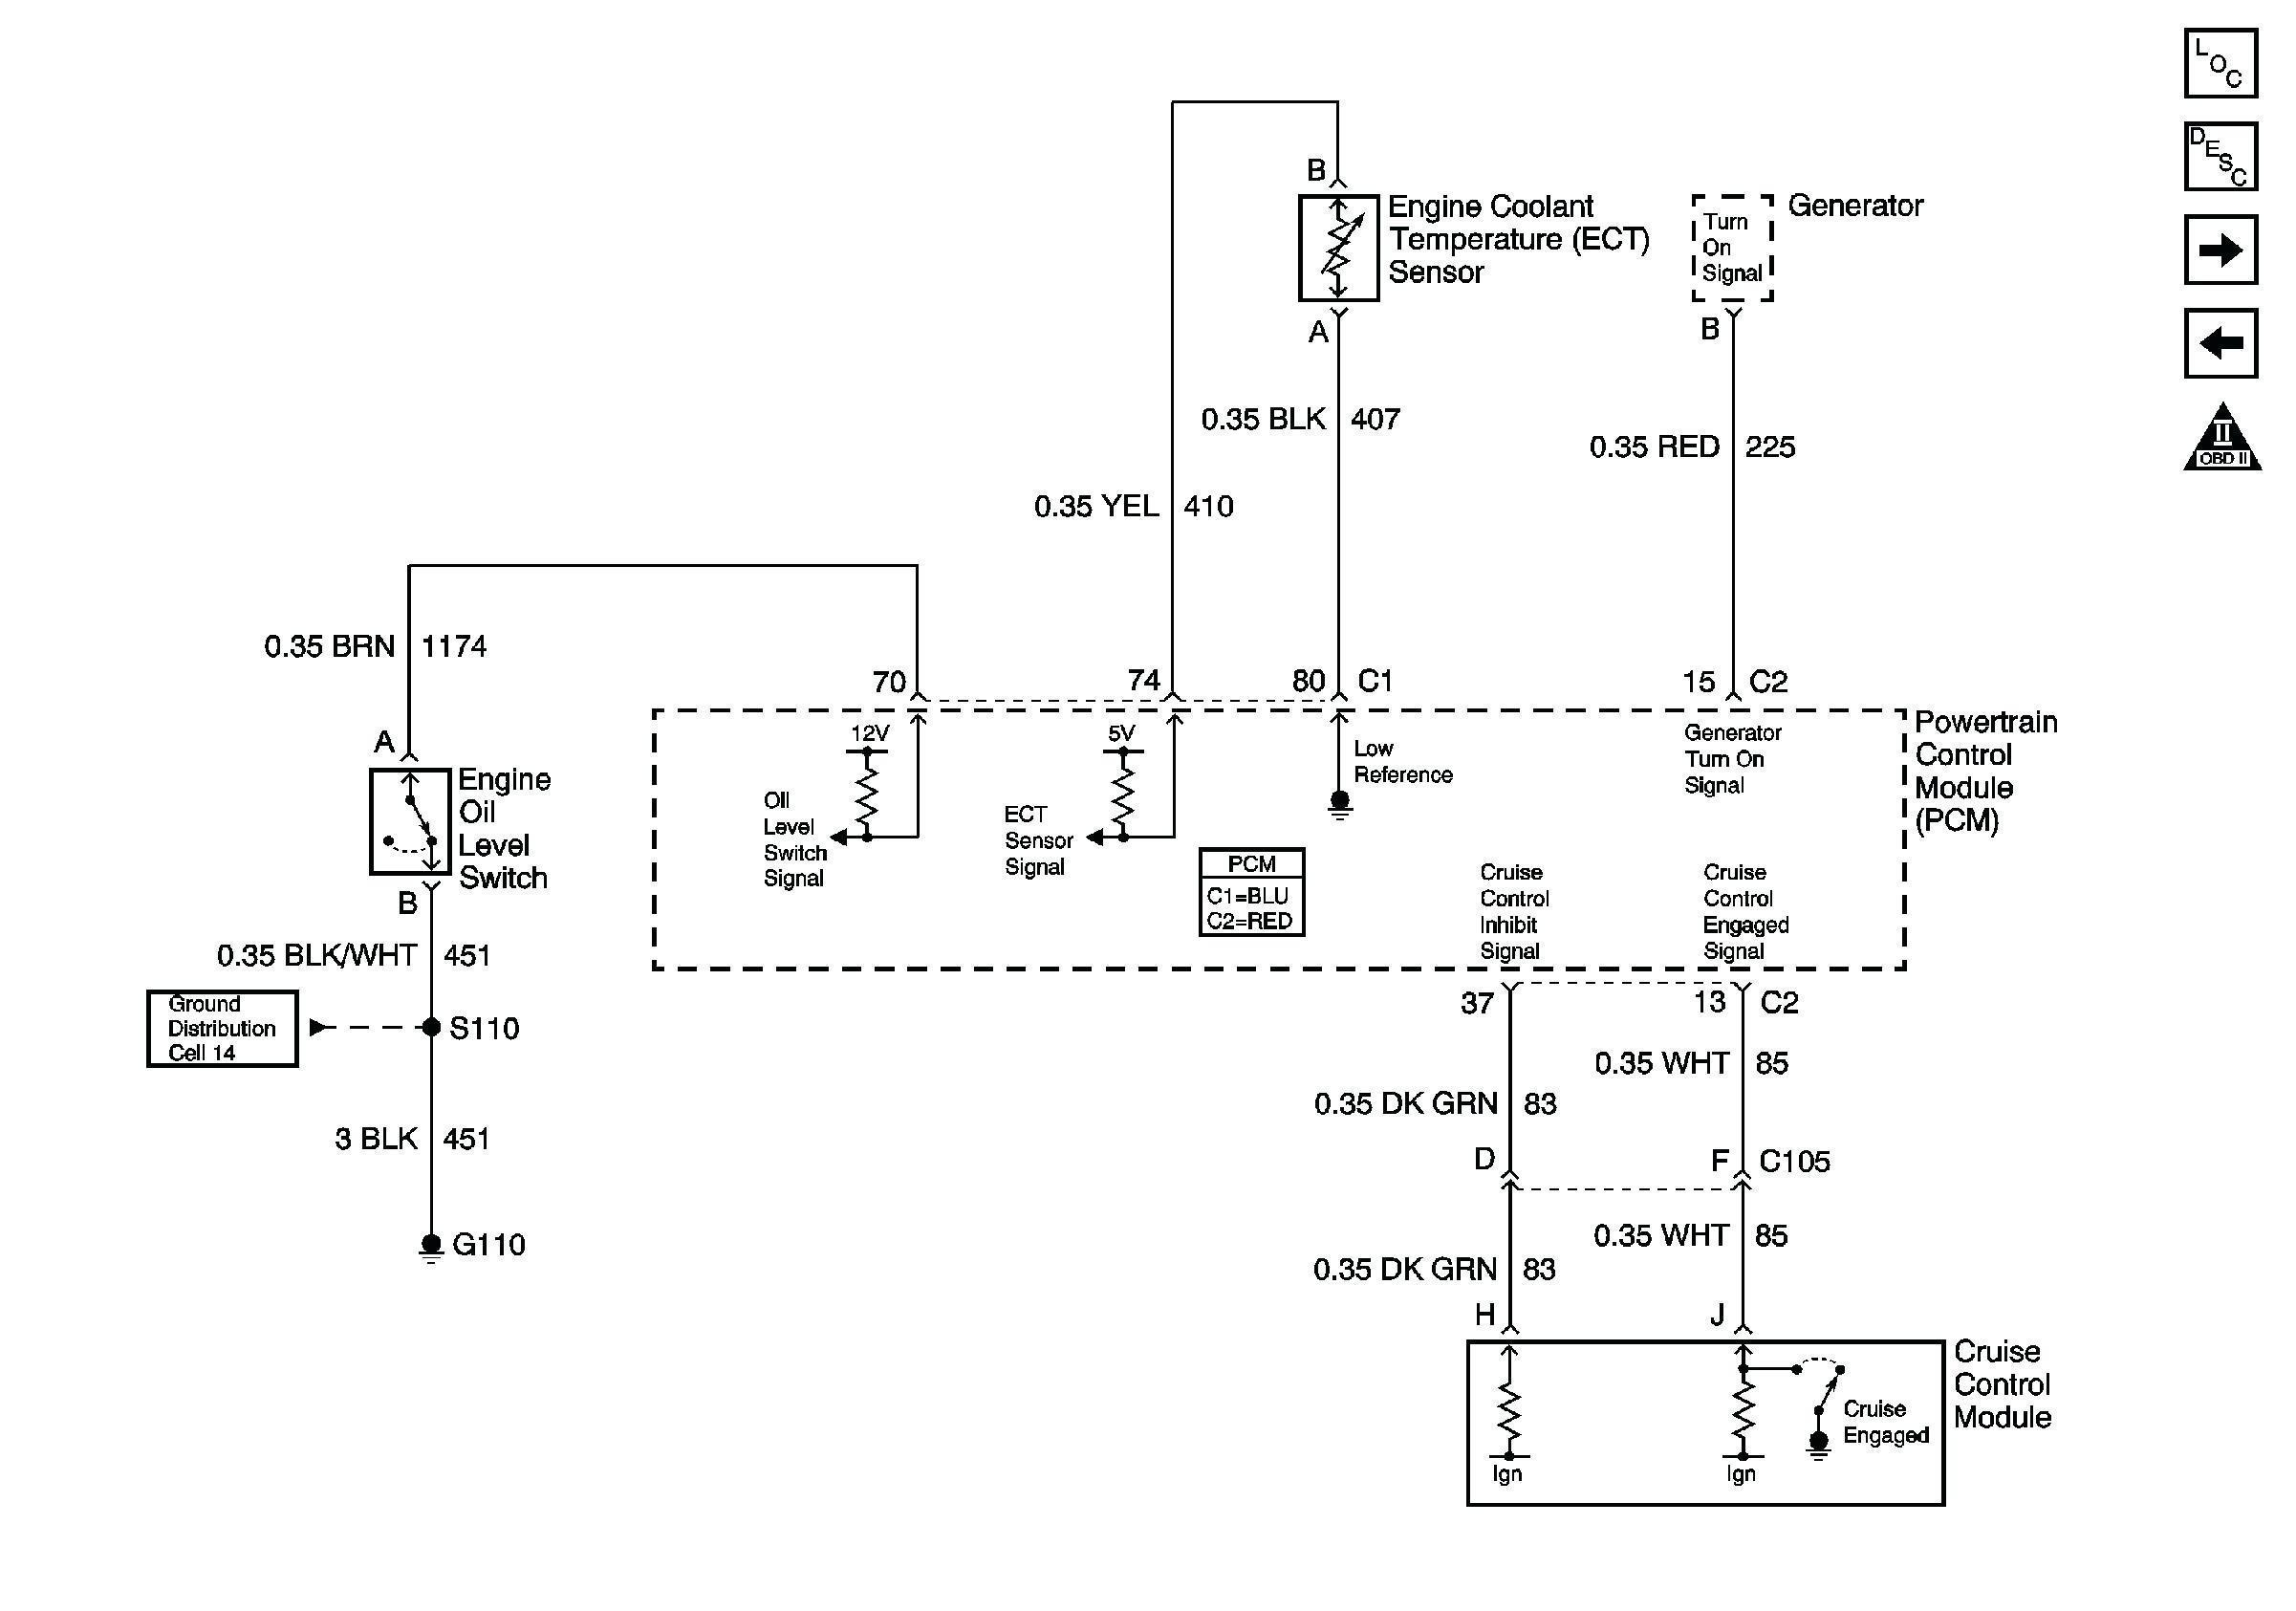 Wiring Diagram for Delco Alternator Refrence Gm Alternator Wiring Diagram New Awesome 3 Wire Alternator Wiring